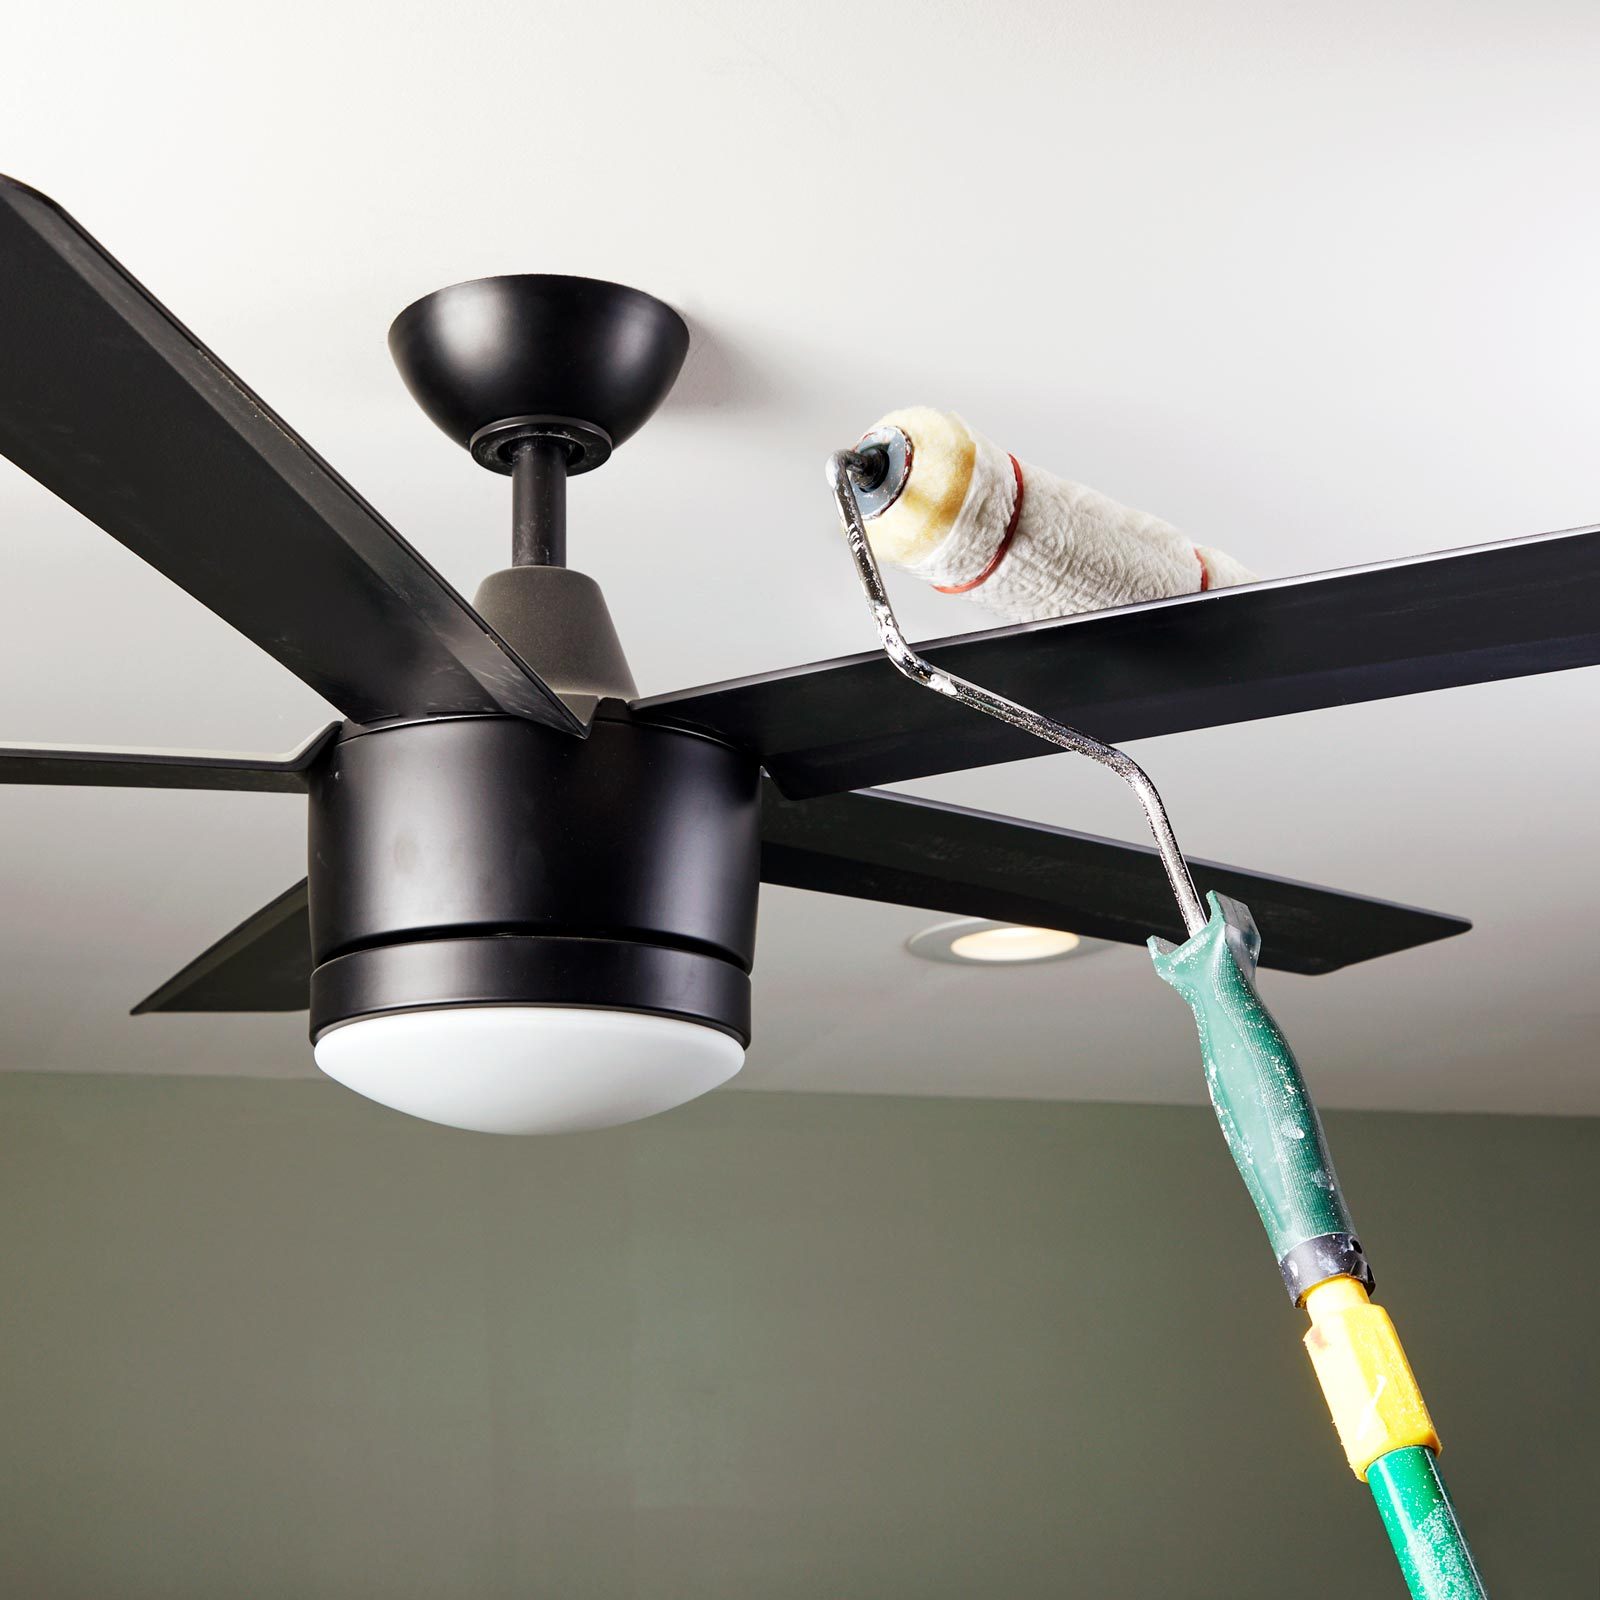 using paint roller to dust off ceiling fan